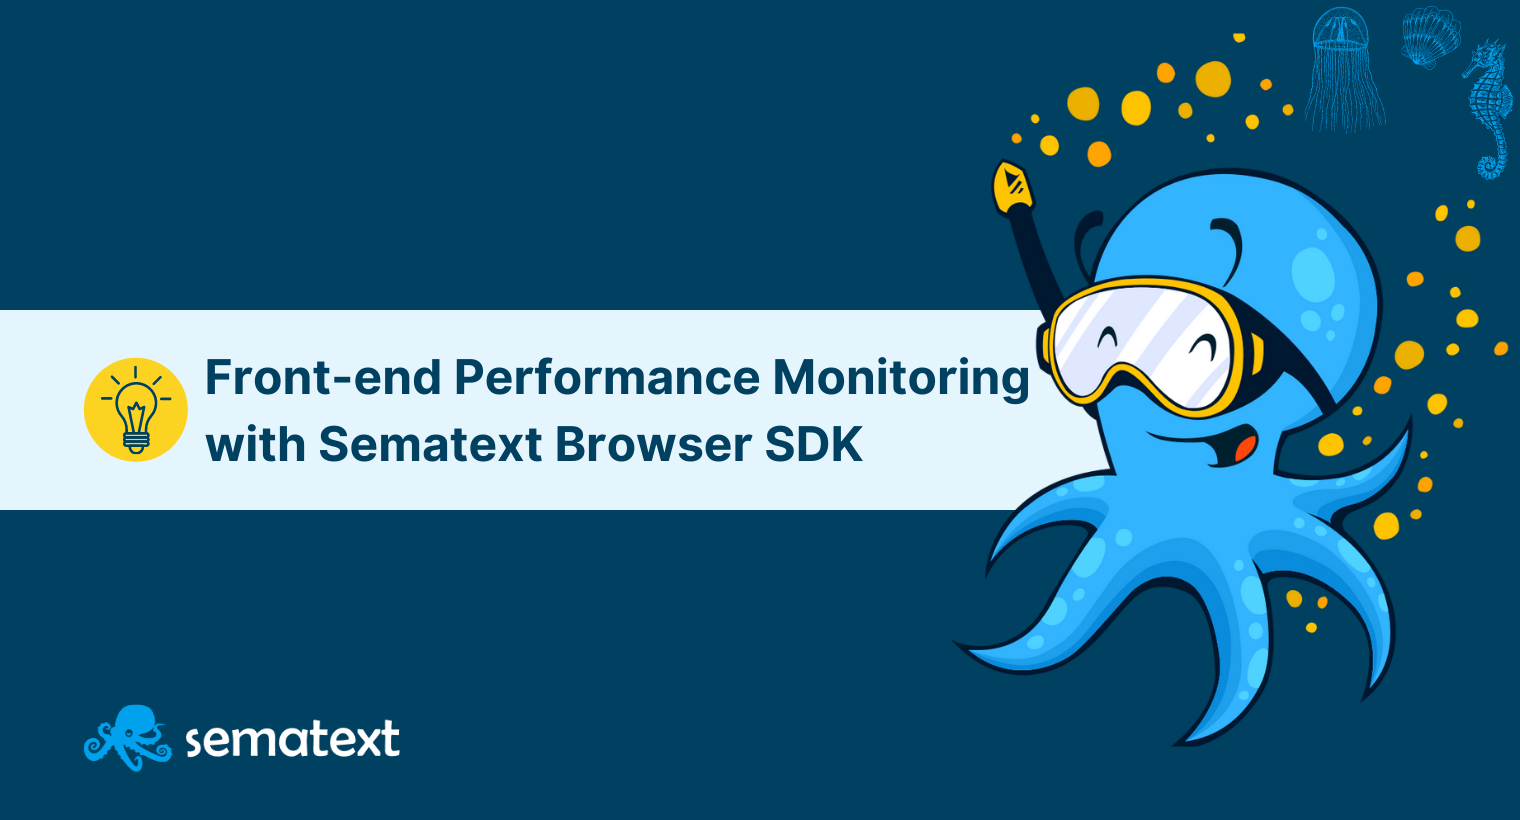 Getting Started with Sematext Browser SDK for Front-end Performance Monitoring